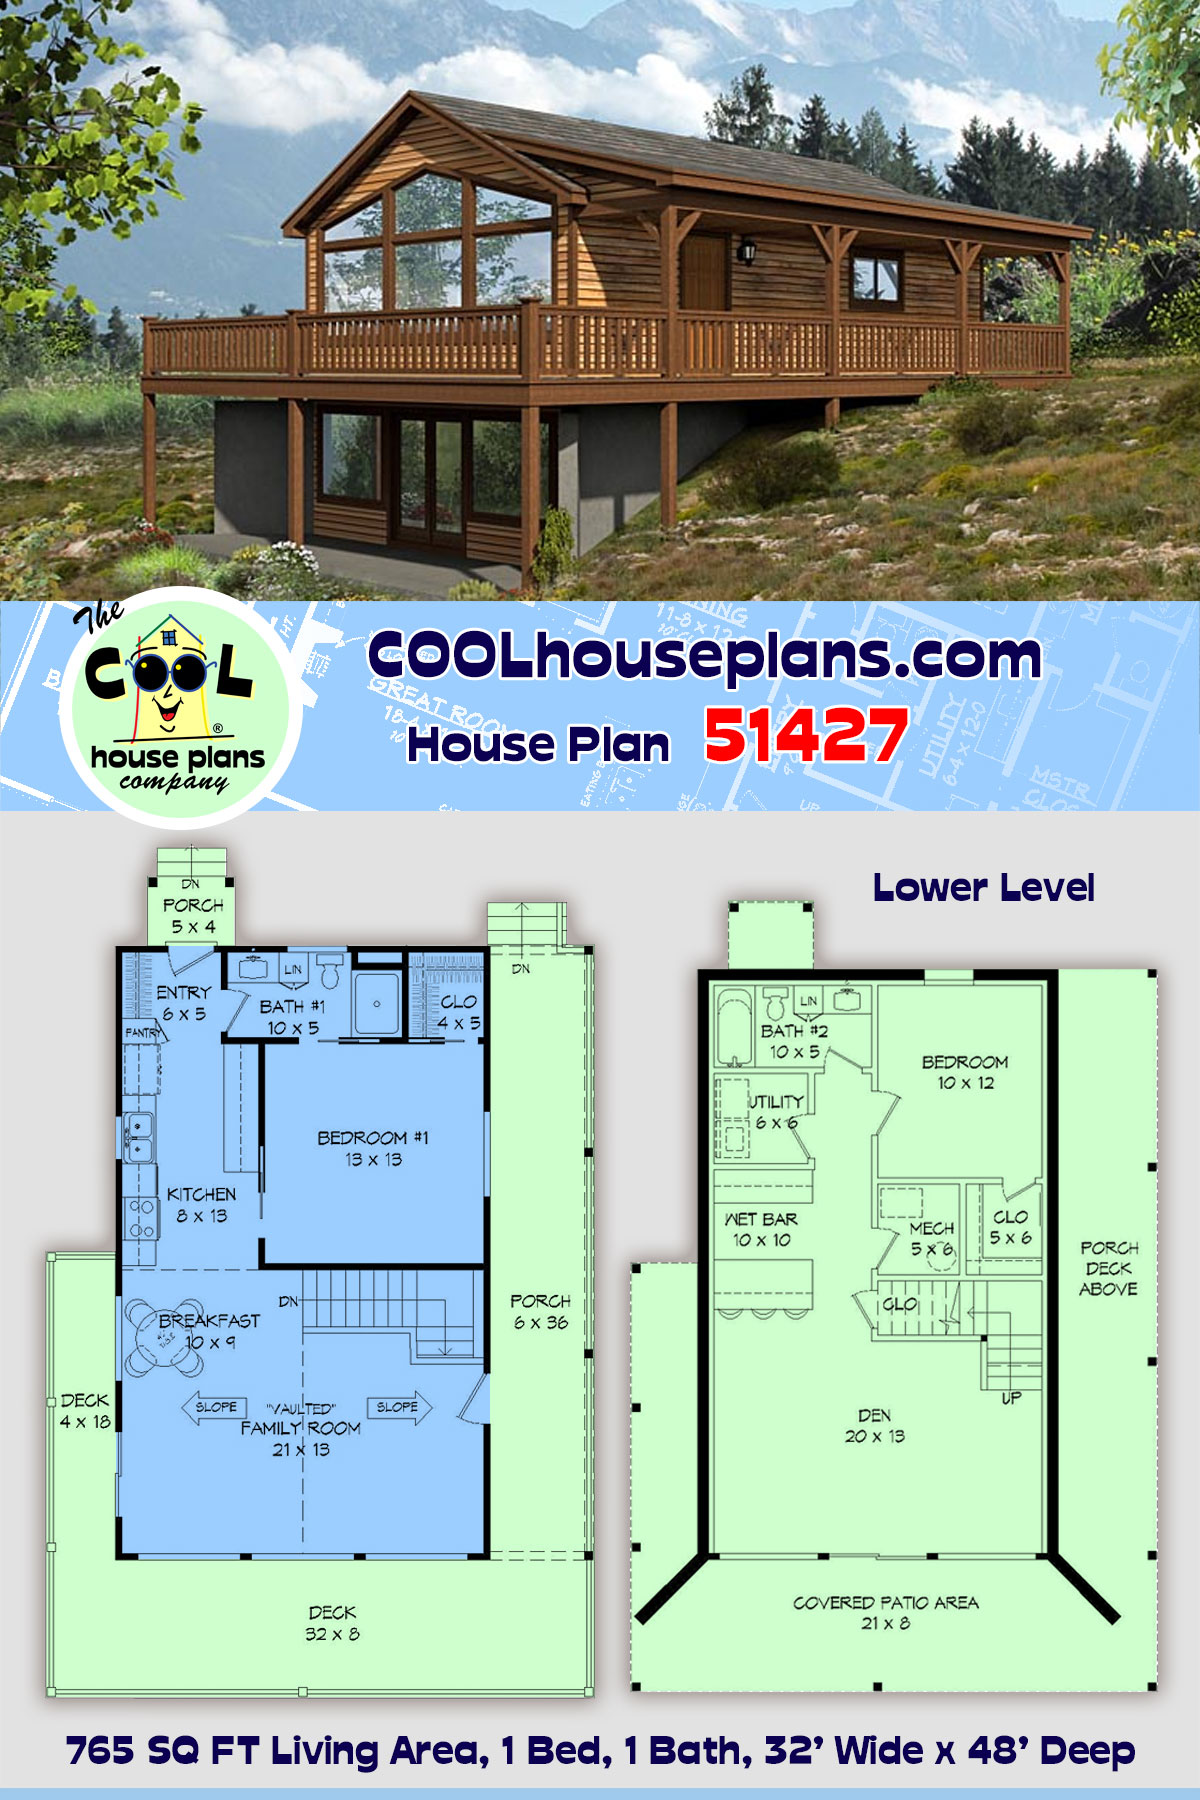 Cabin, Contemporary, Country House Plan 51427 with 1 Beds, 1 Baths